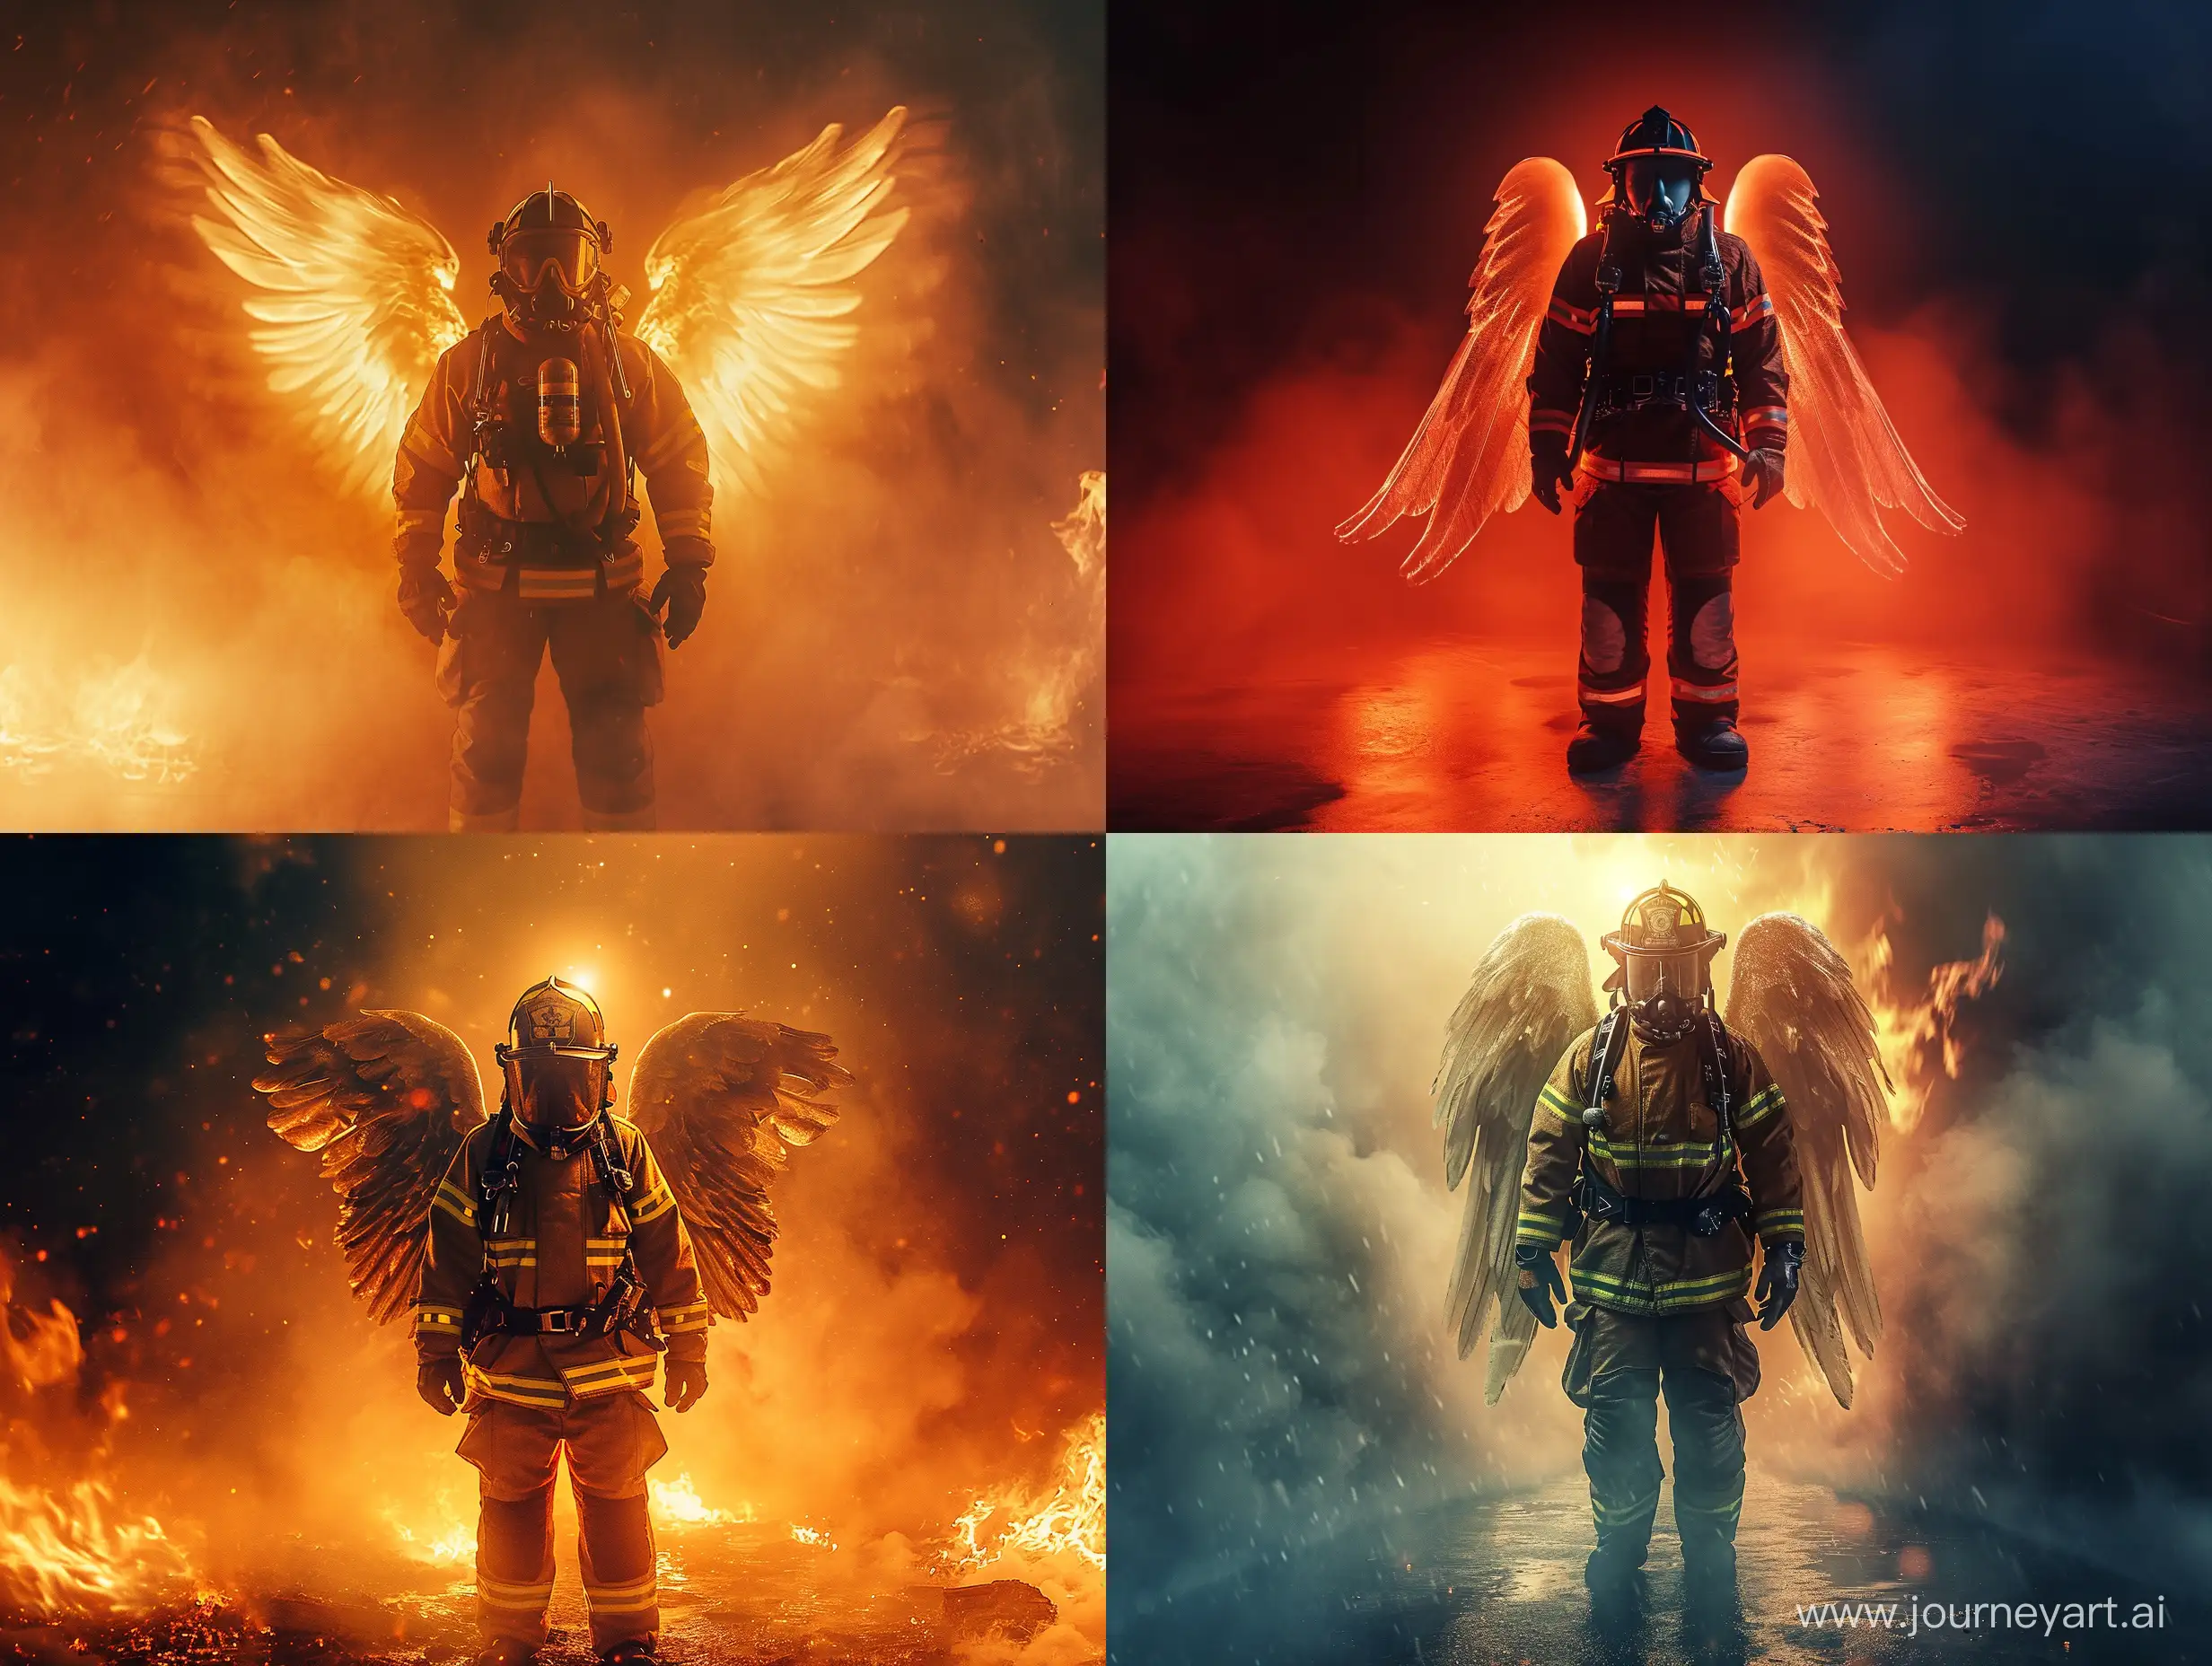 a firefighter stand in center of image, he has two wings in his back, front view, cinematic lighting and realistic, detailed